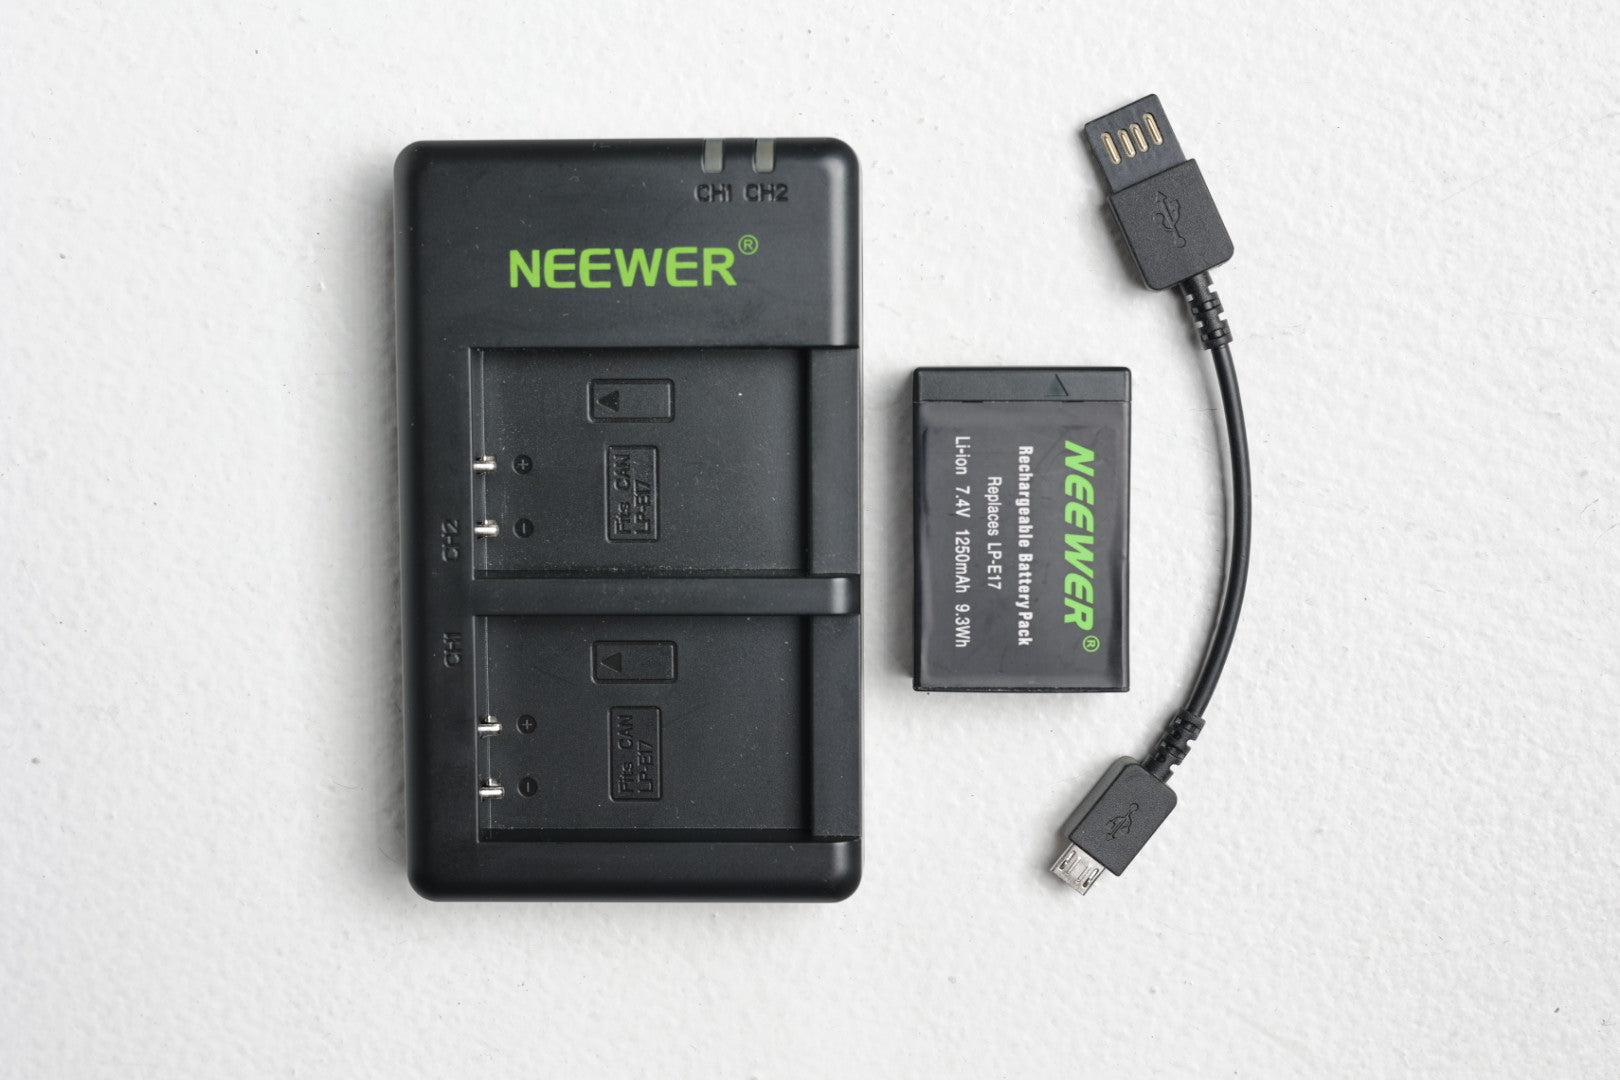 Neewer DULPE17 Dual Battery Charger + 1 Battery, Used